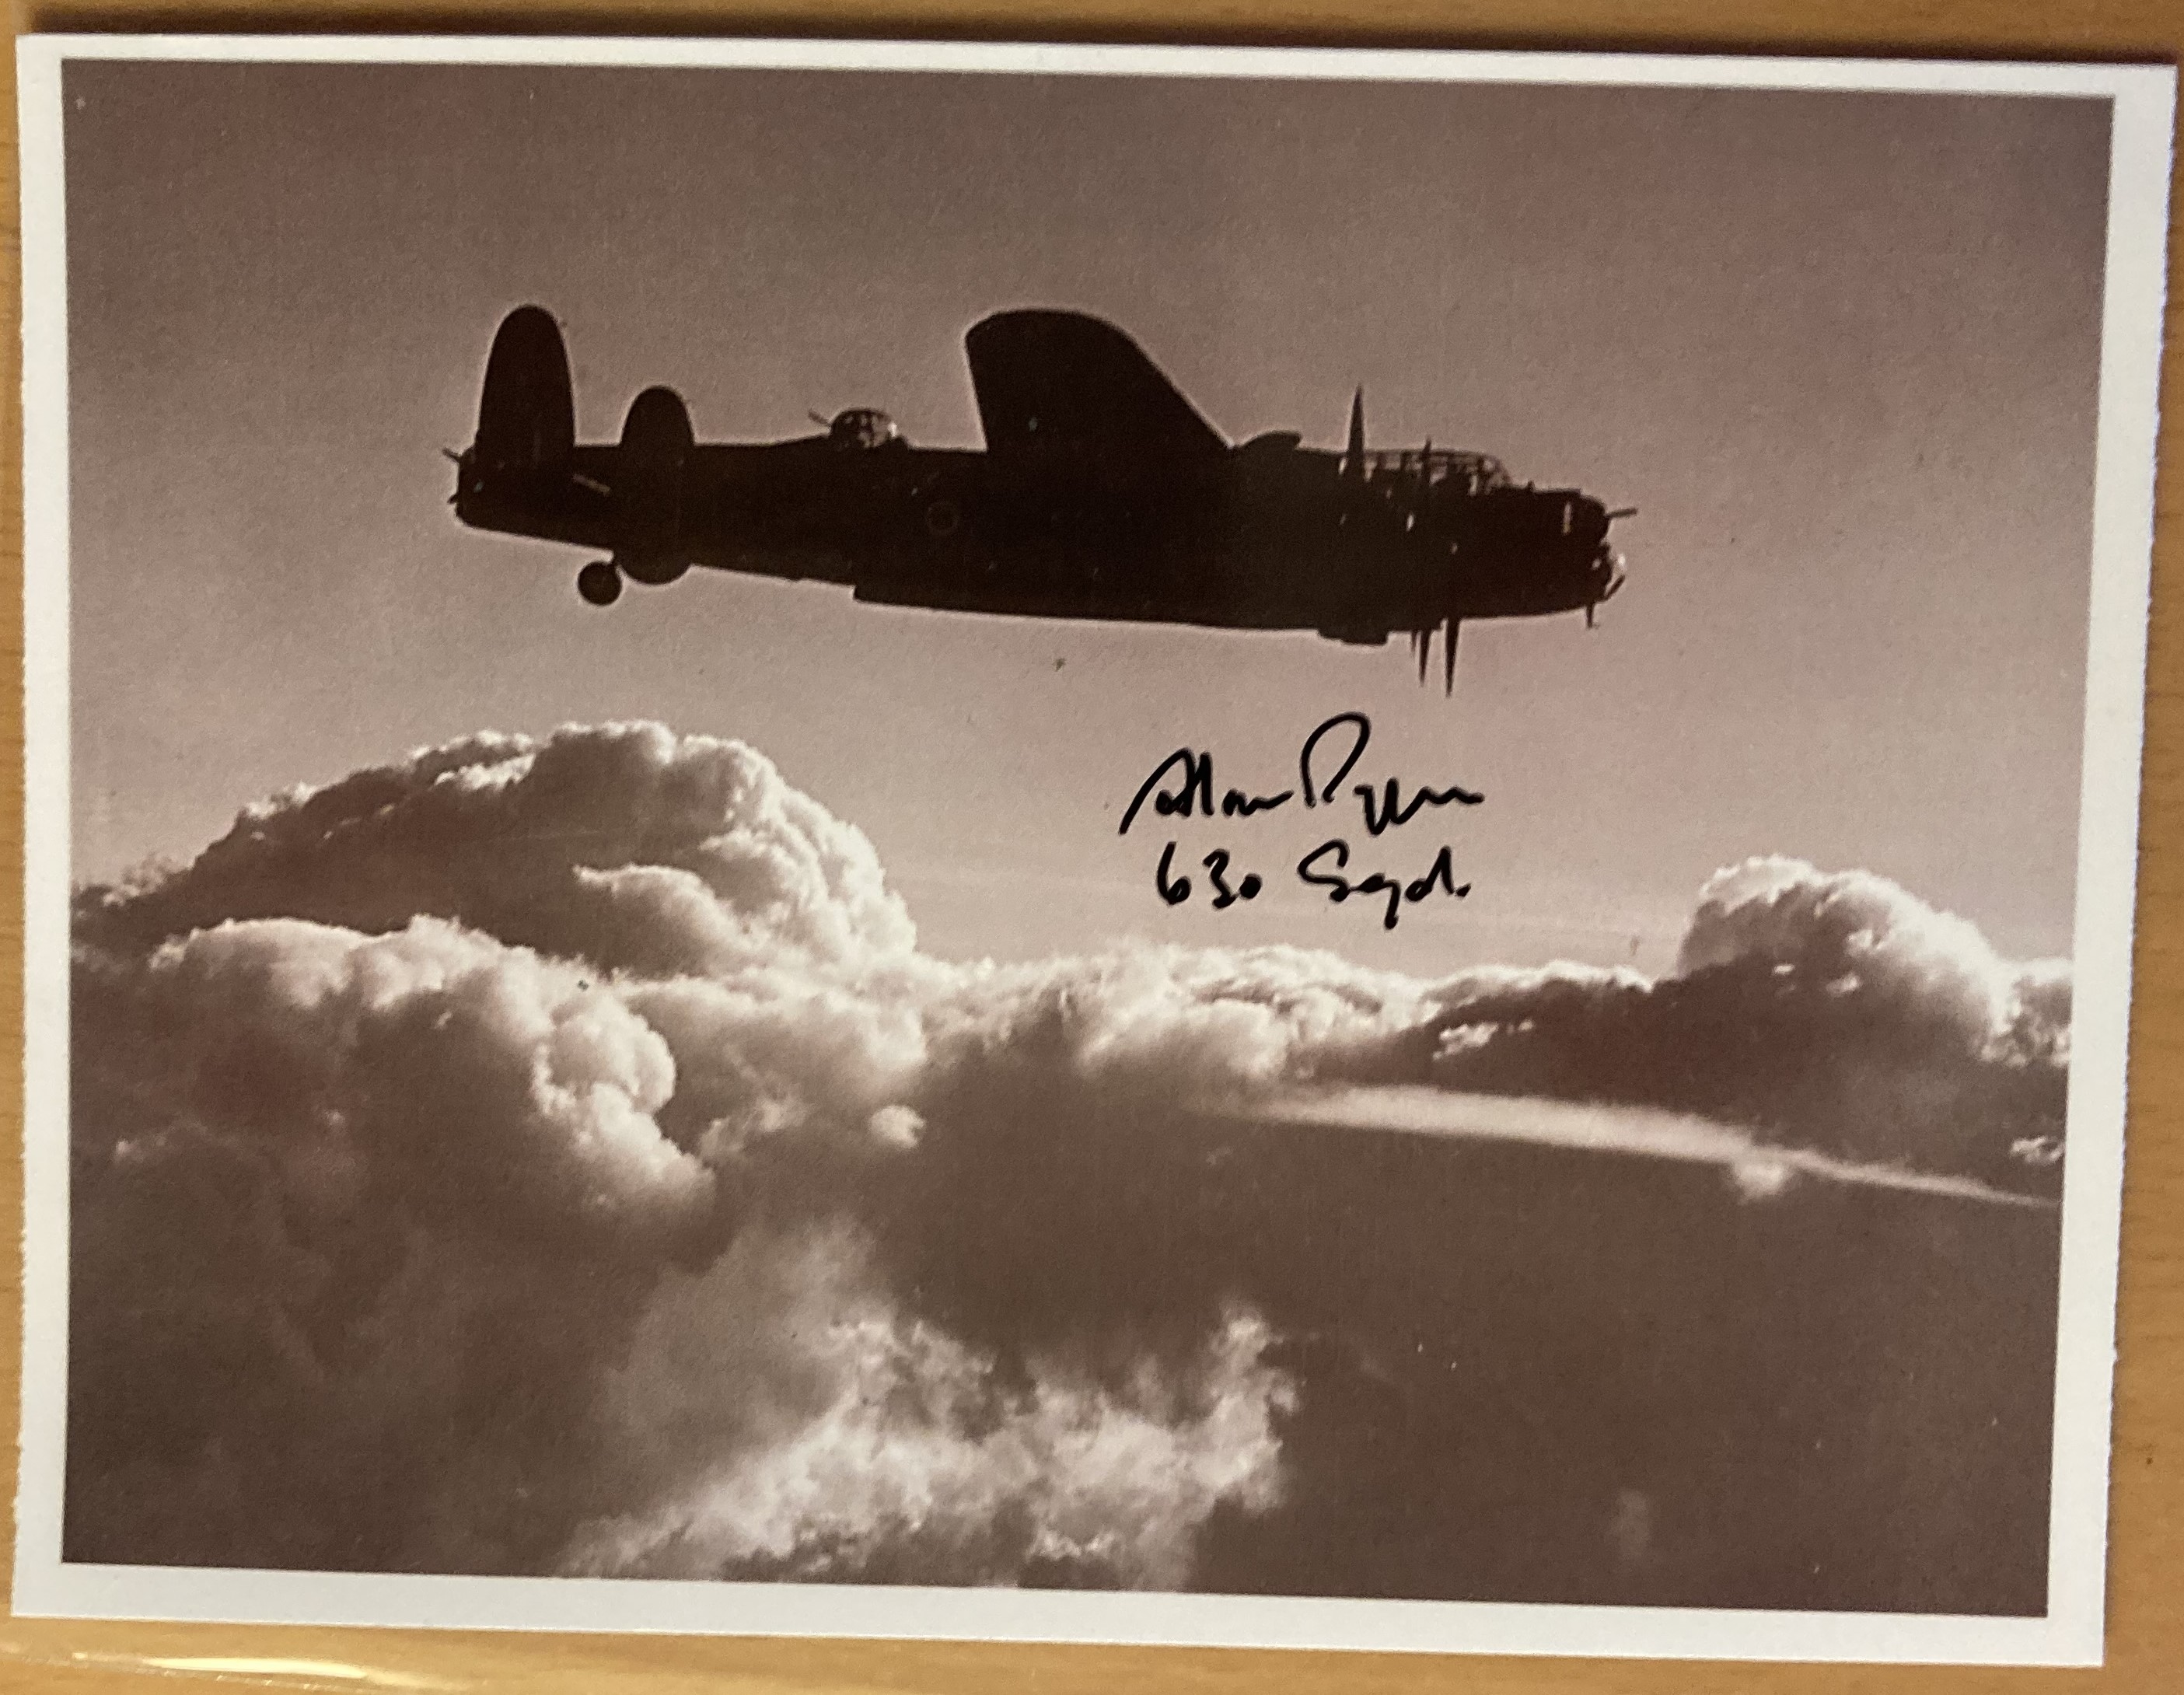 WW2 Flt Lt Alan Payne DFC 630 sqn signed 6 x 4 inch Lancaster in flight picture. Bomber Command